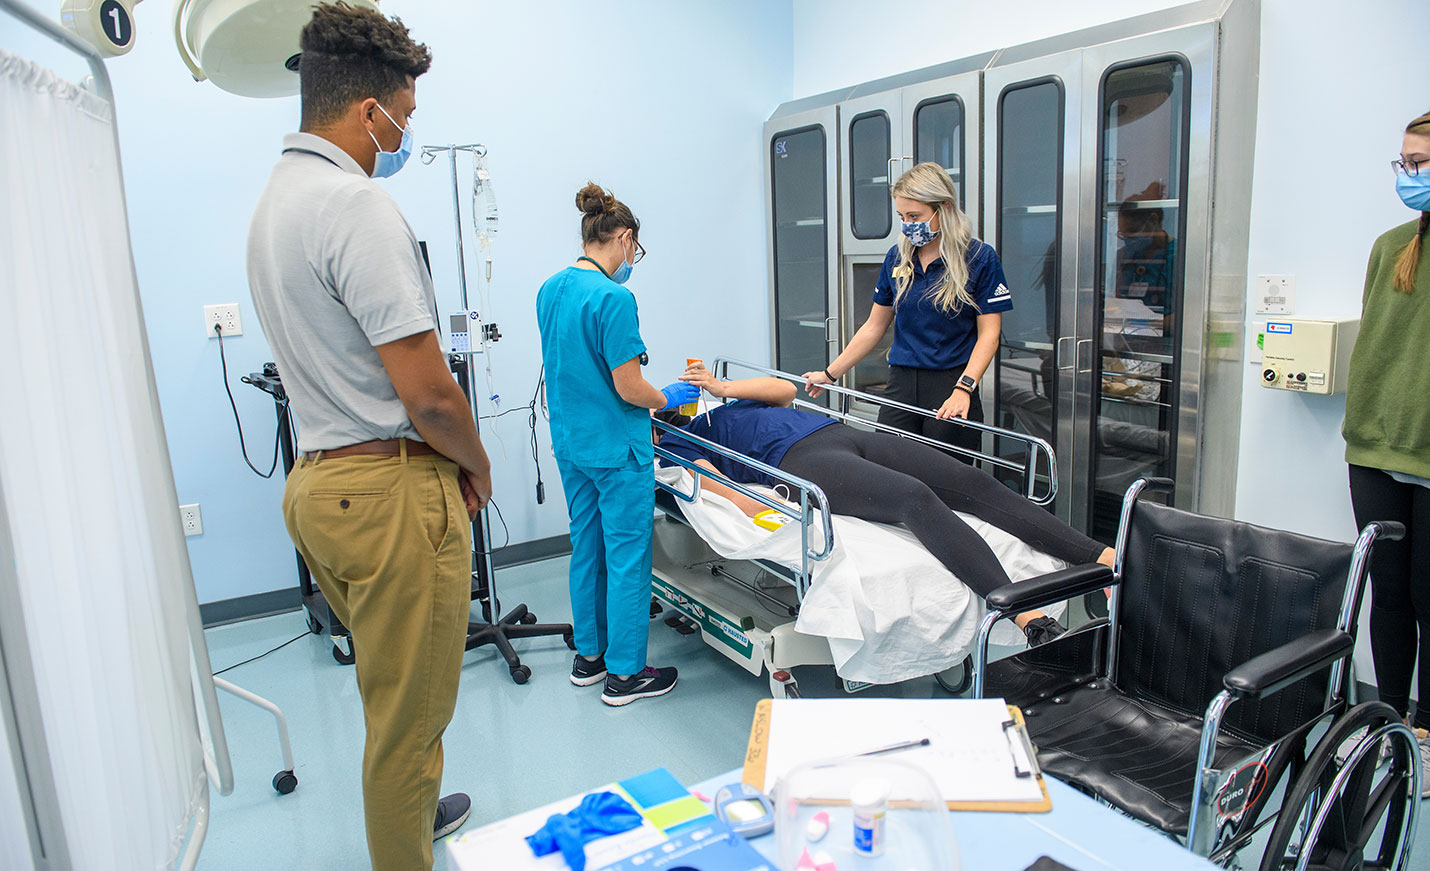 A nursing student and athletic training student work together to tend to a patient on a hospital bed in a mock treatment session.